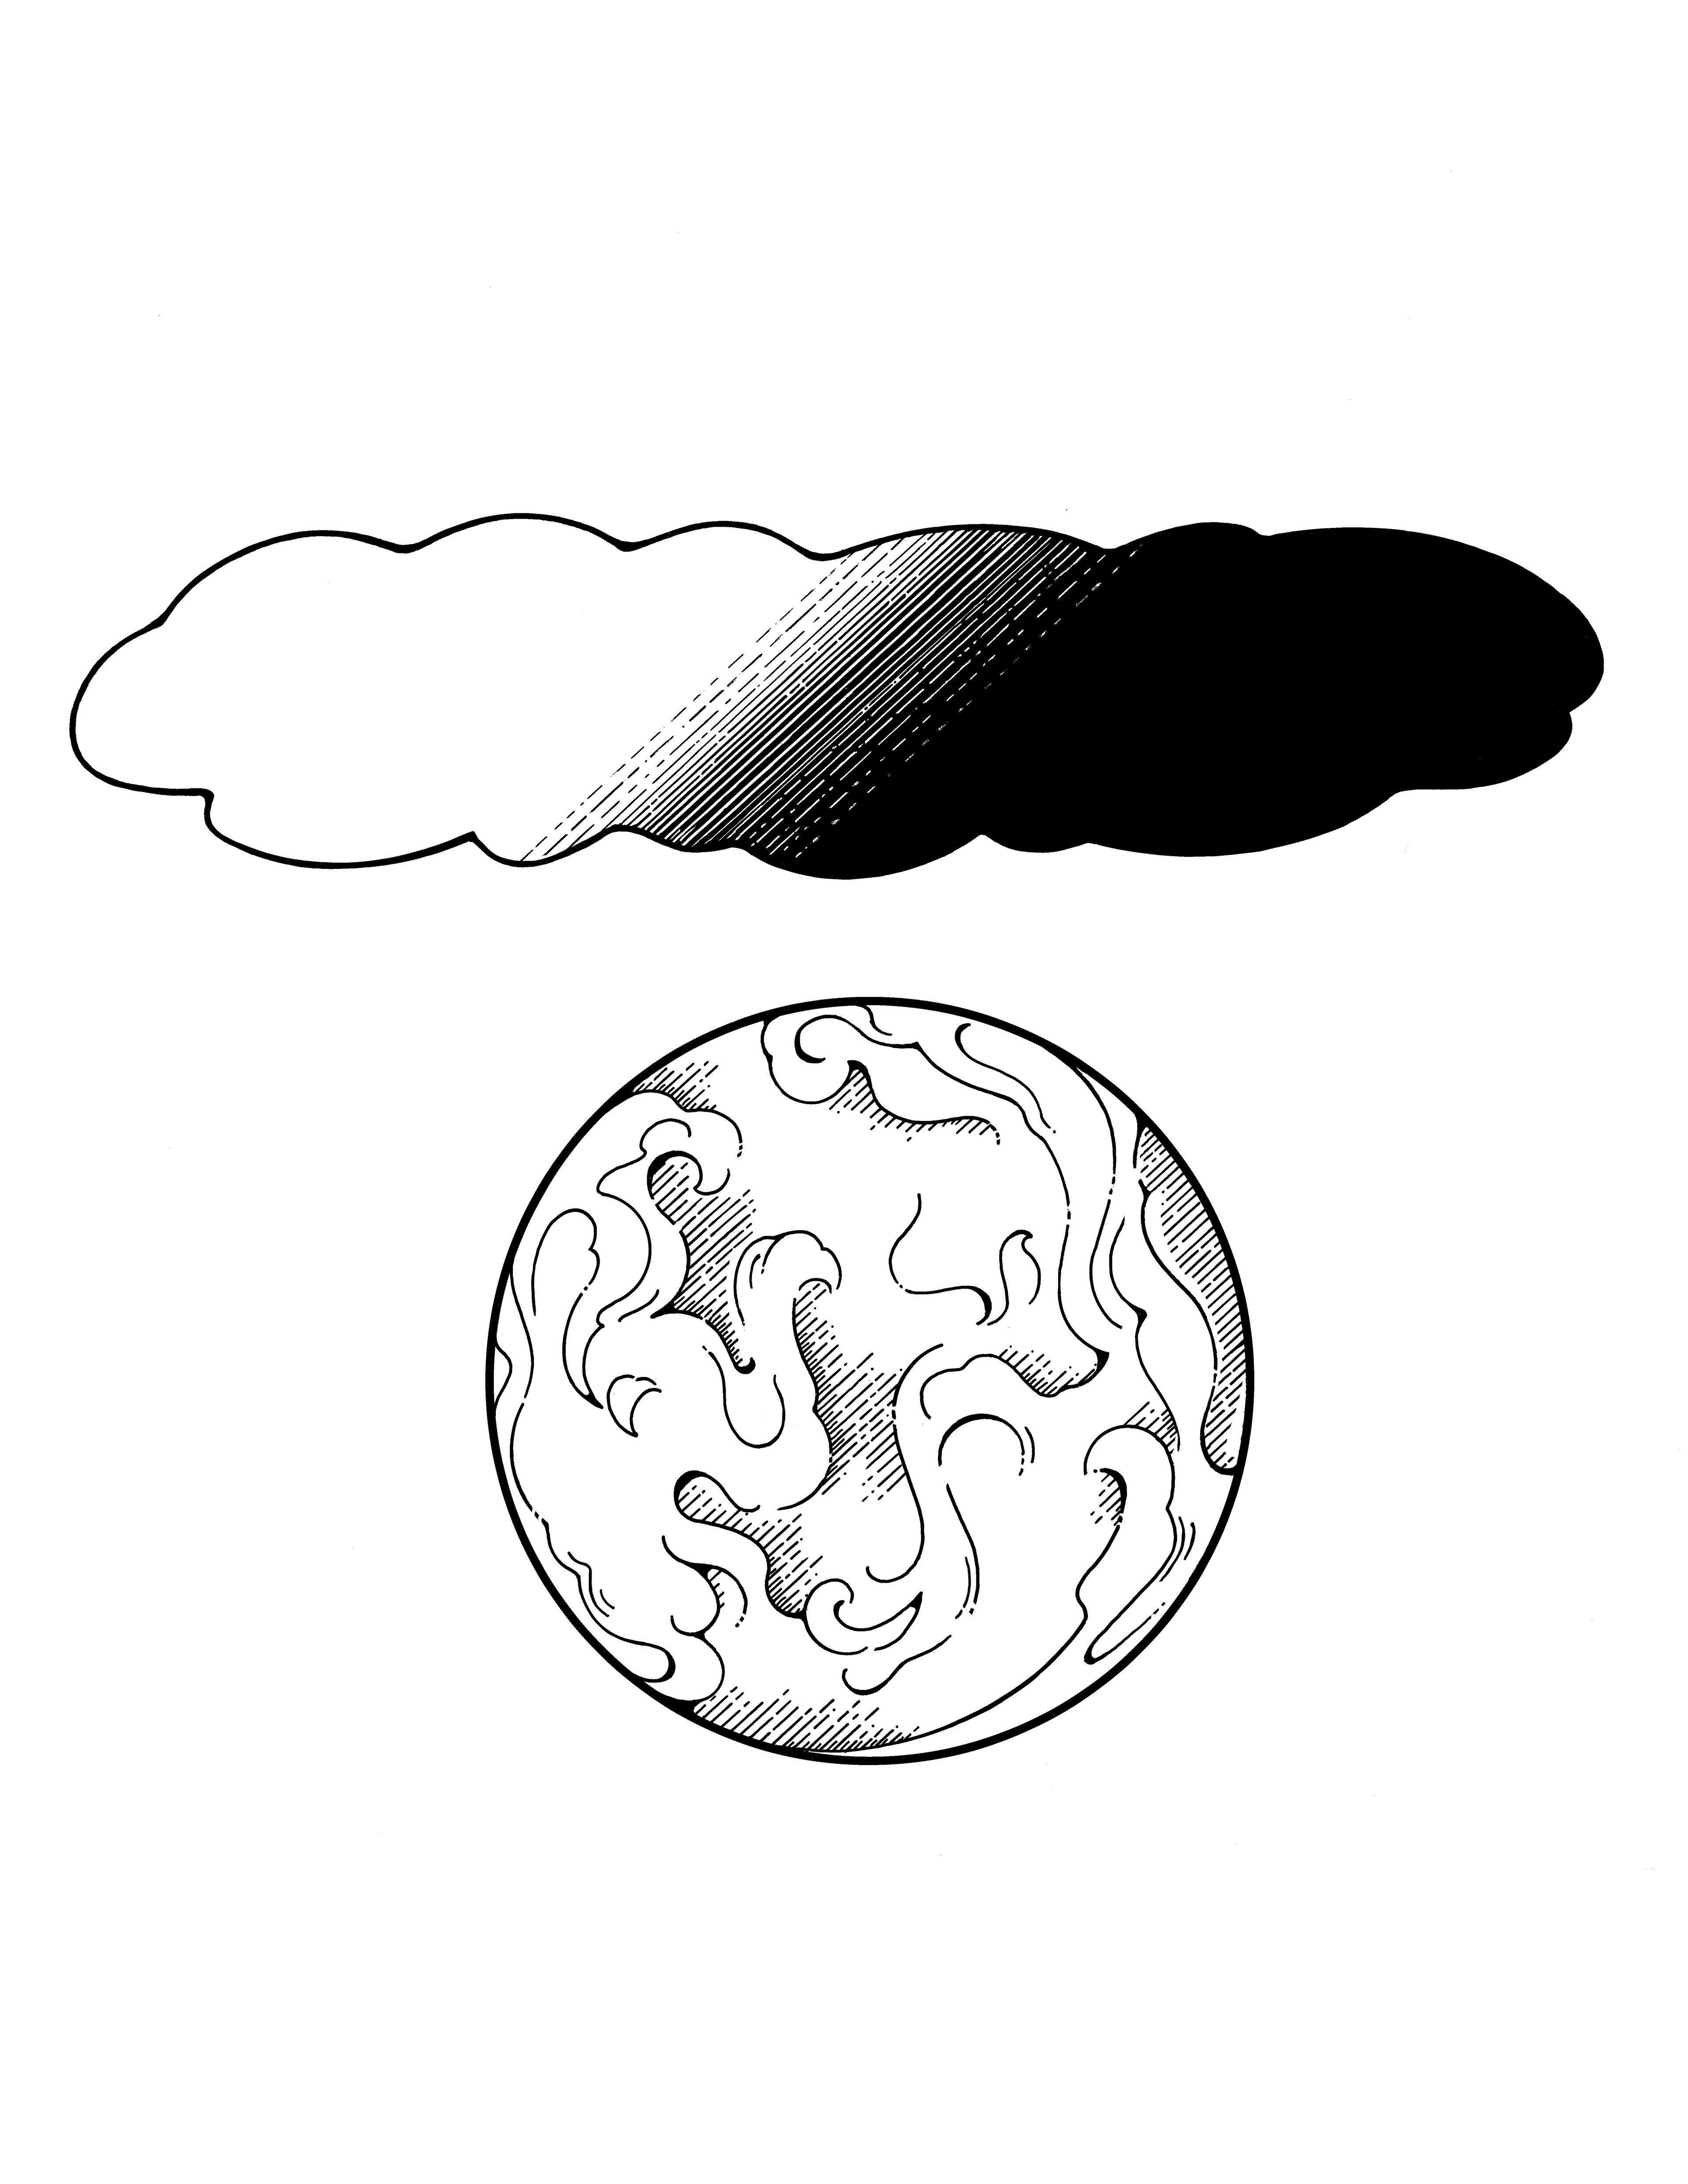 An illustration of the earth with a cloud of light and darkness above it.